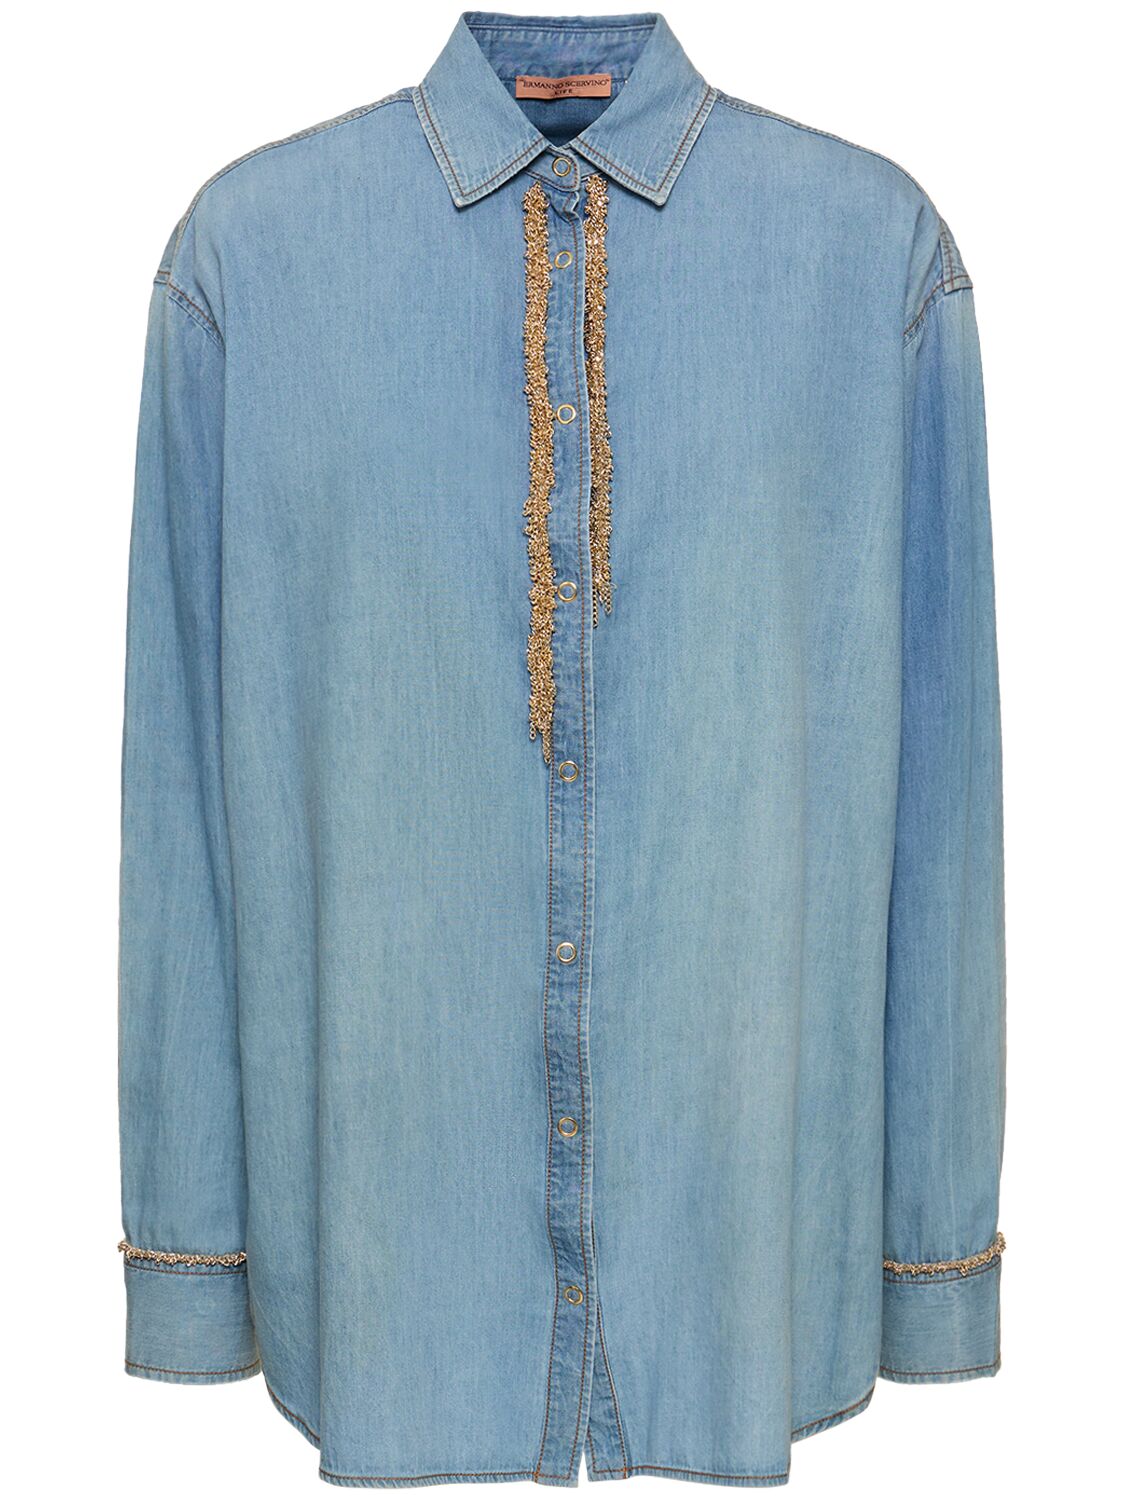 Image of Embroidered Details Shirt